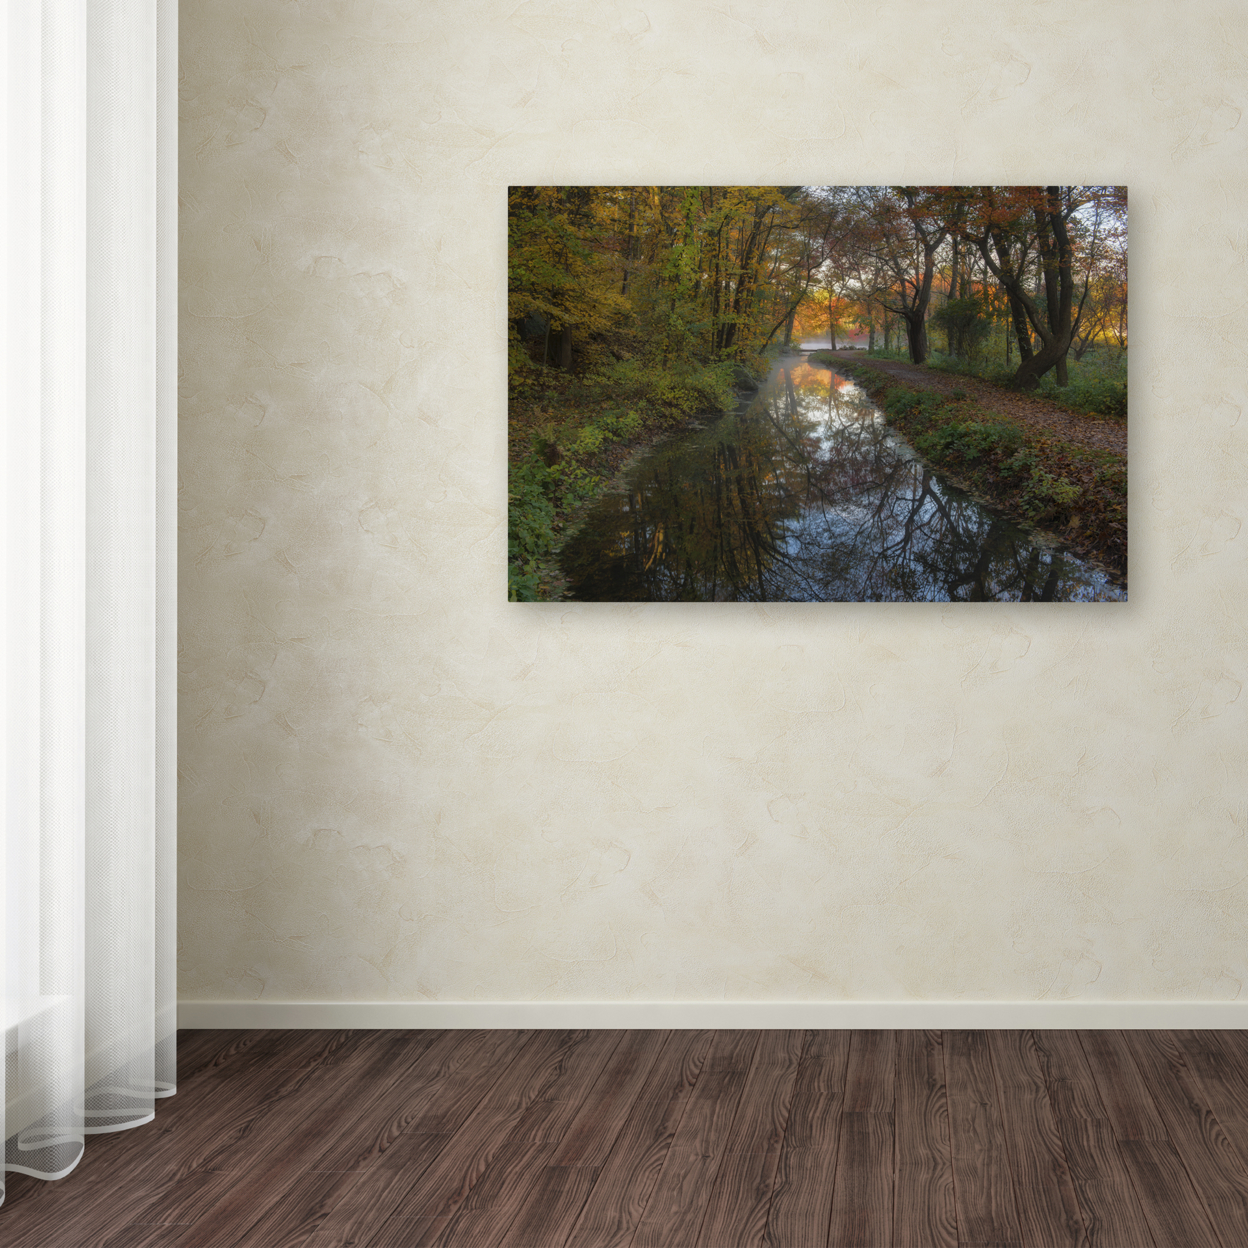 Michael Blanchette Photography 'Take Me To The Pond' Canvas Art 16 X 24